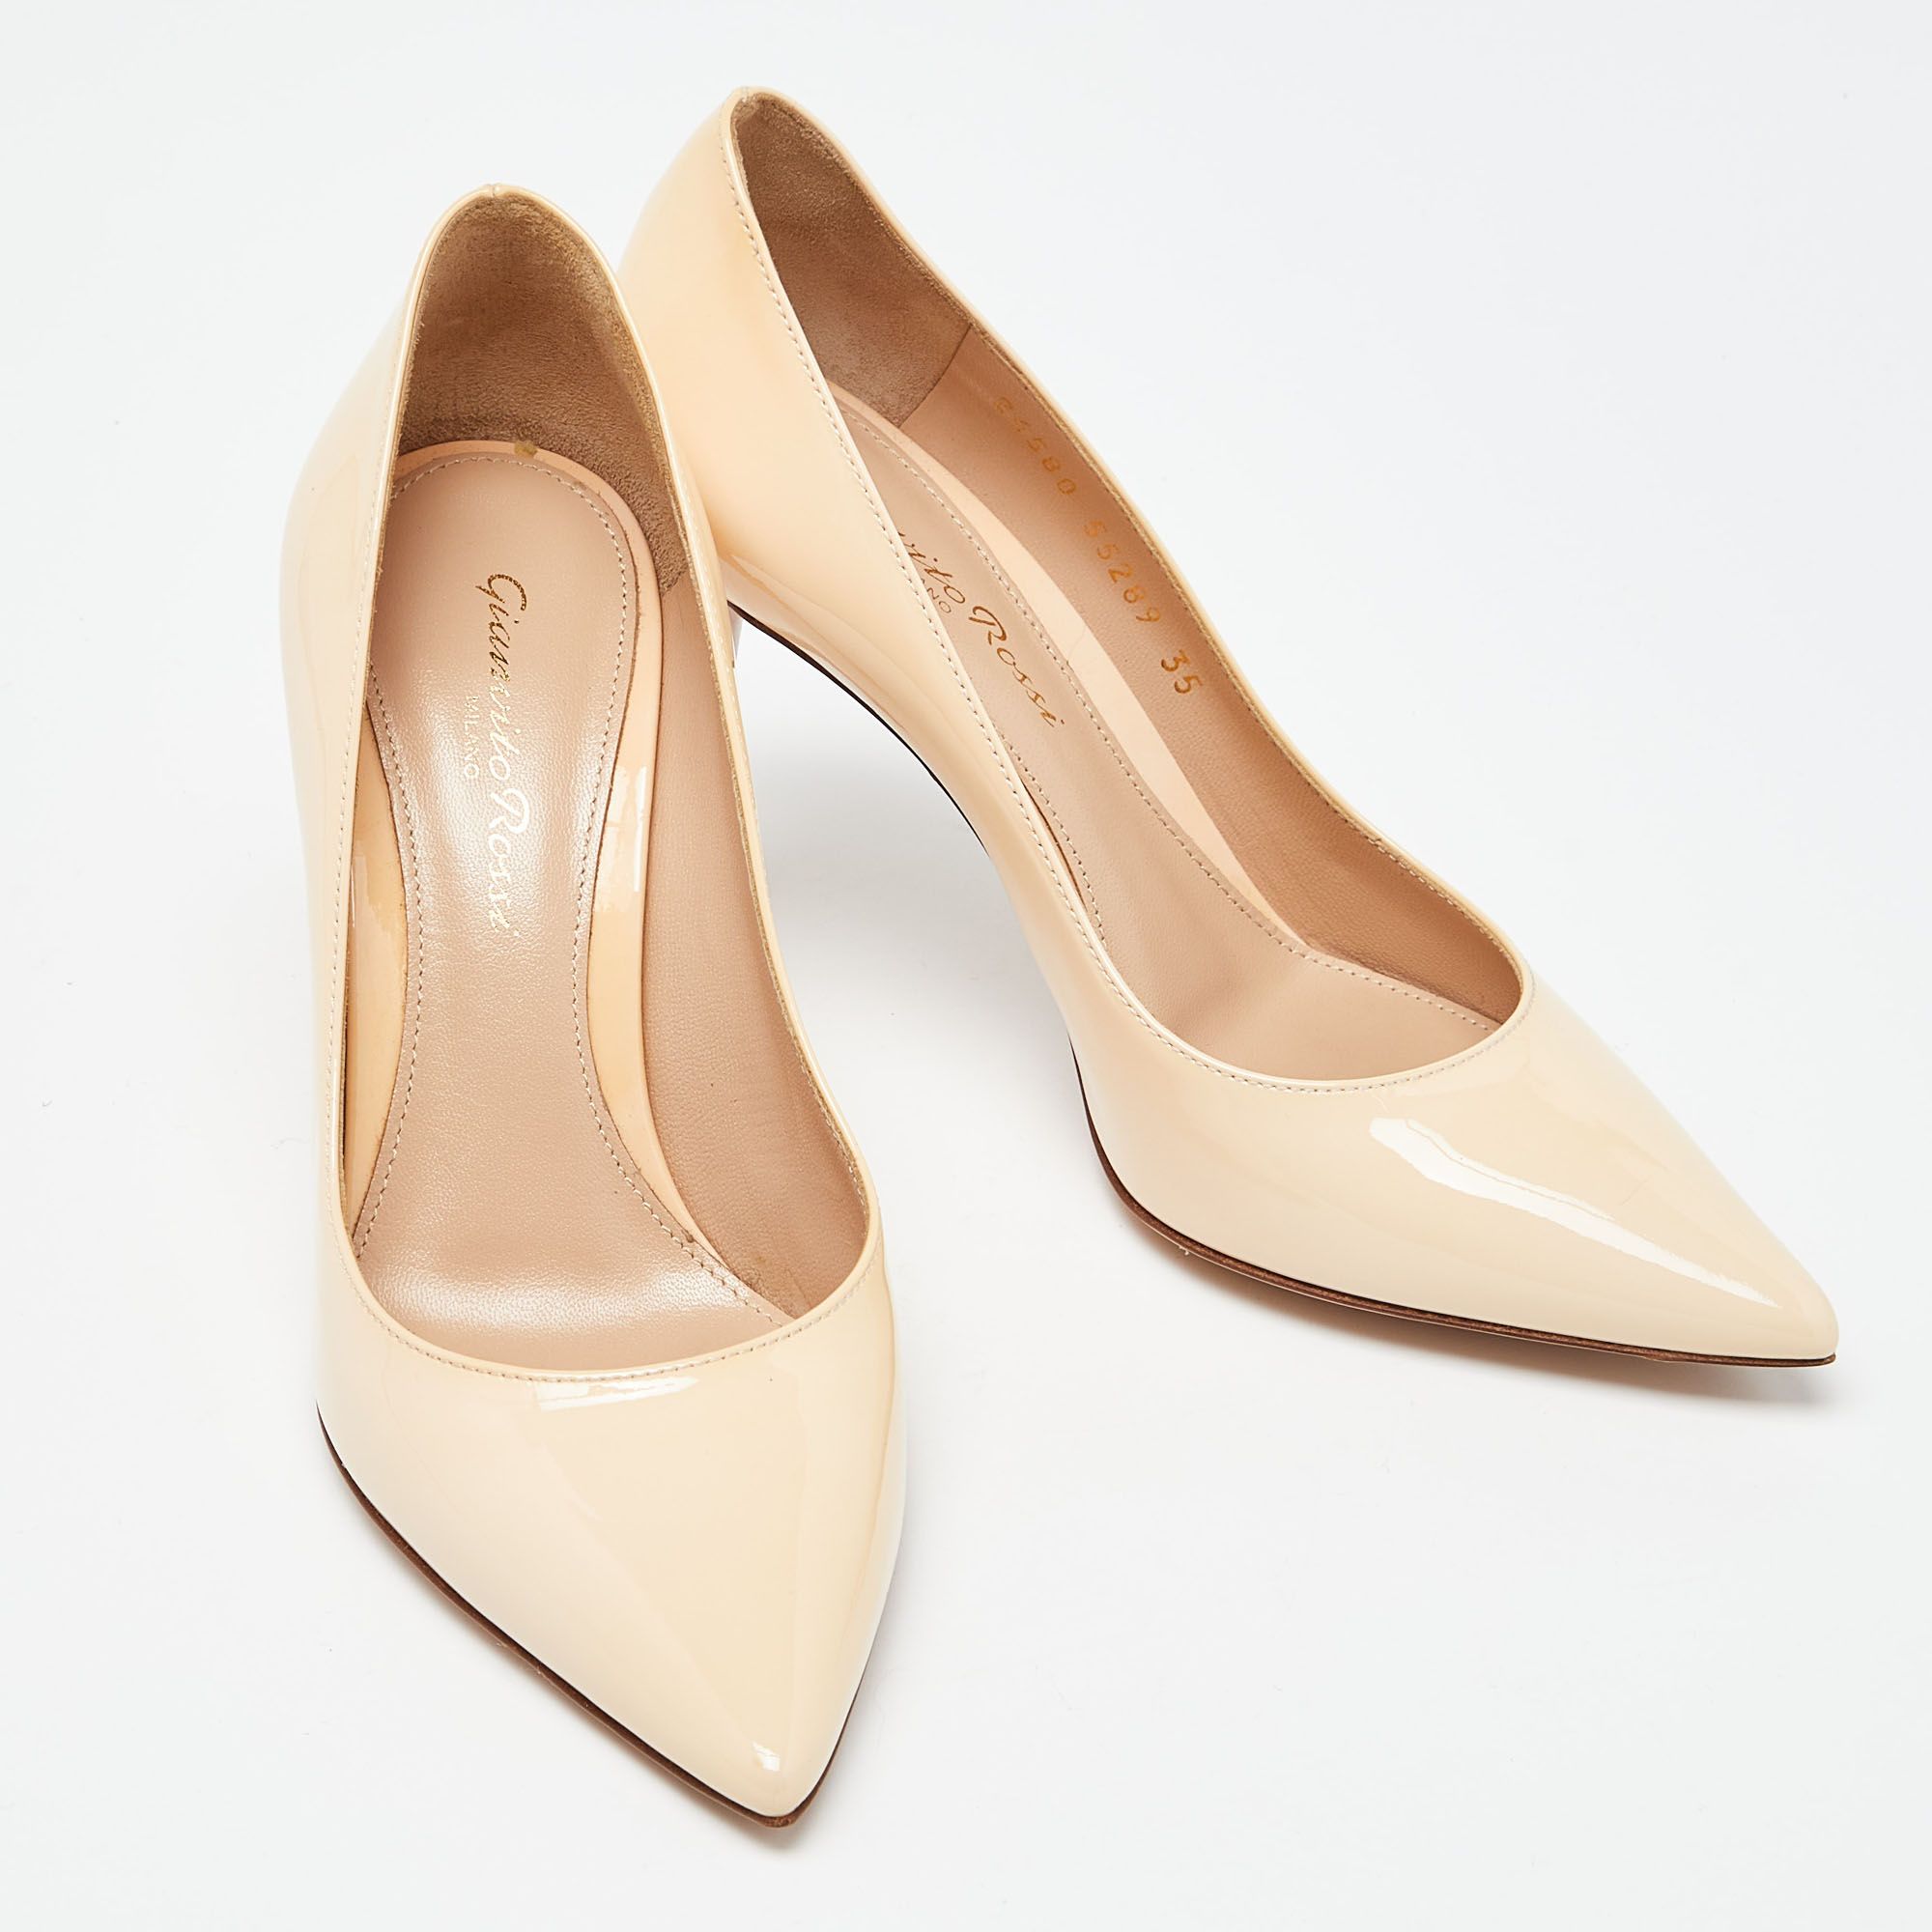 Gianvito Rossi Beige Patent Leather Gianvito 85 Pointed Toe Pumps Size 35